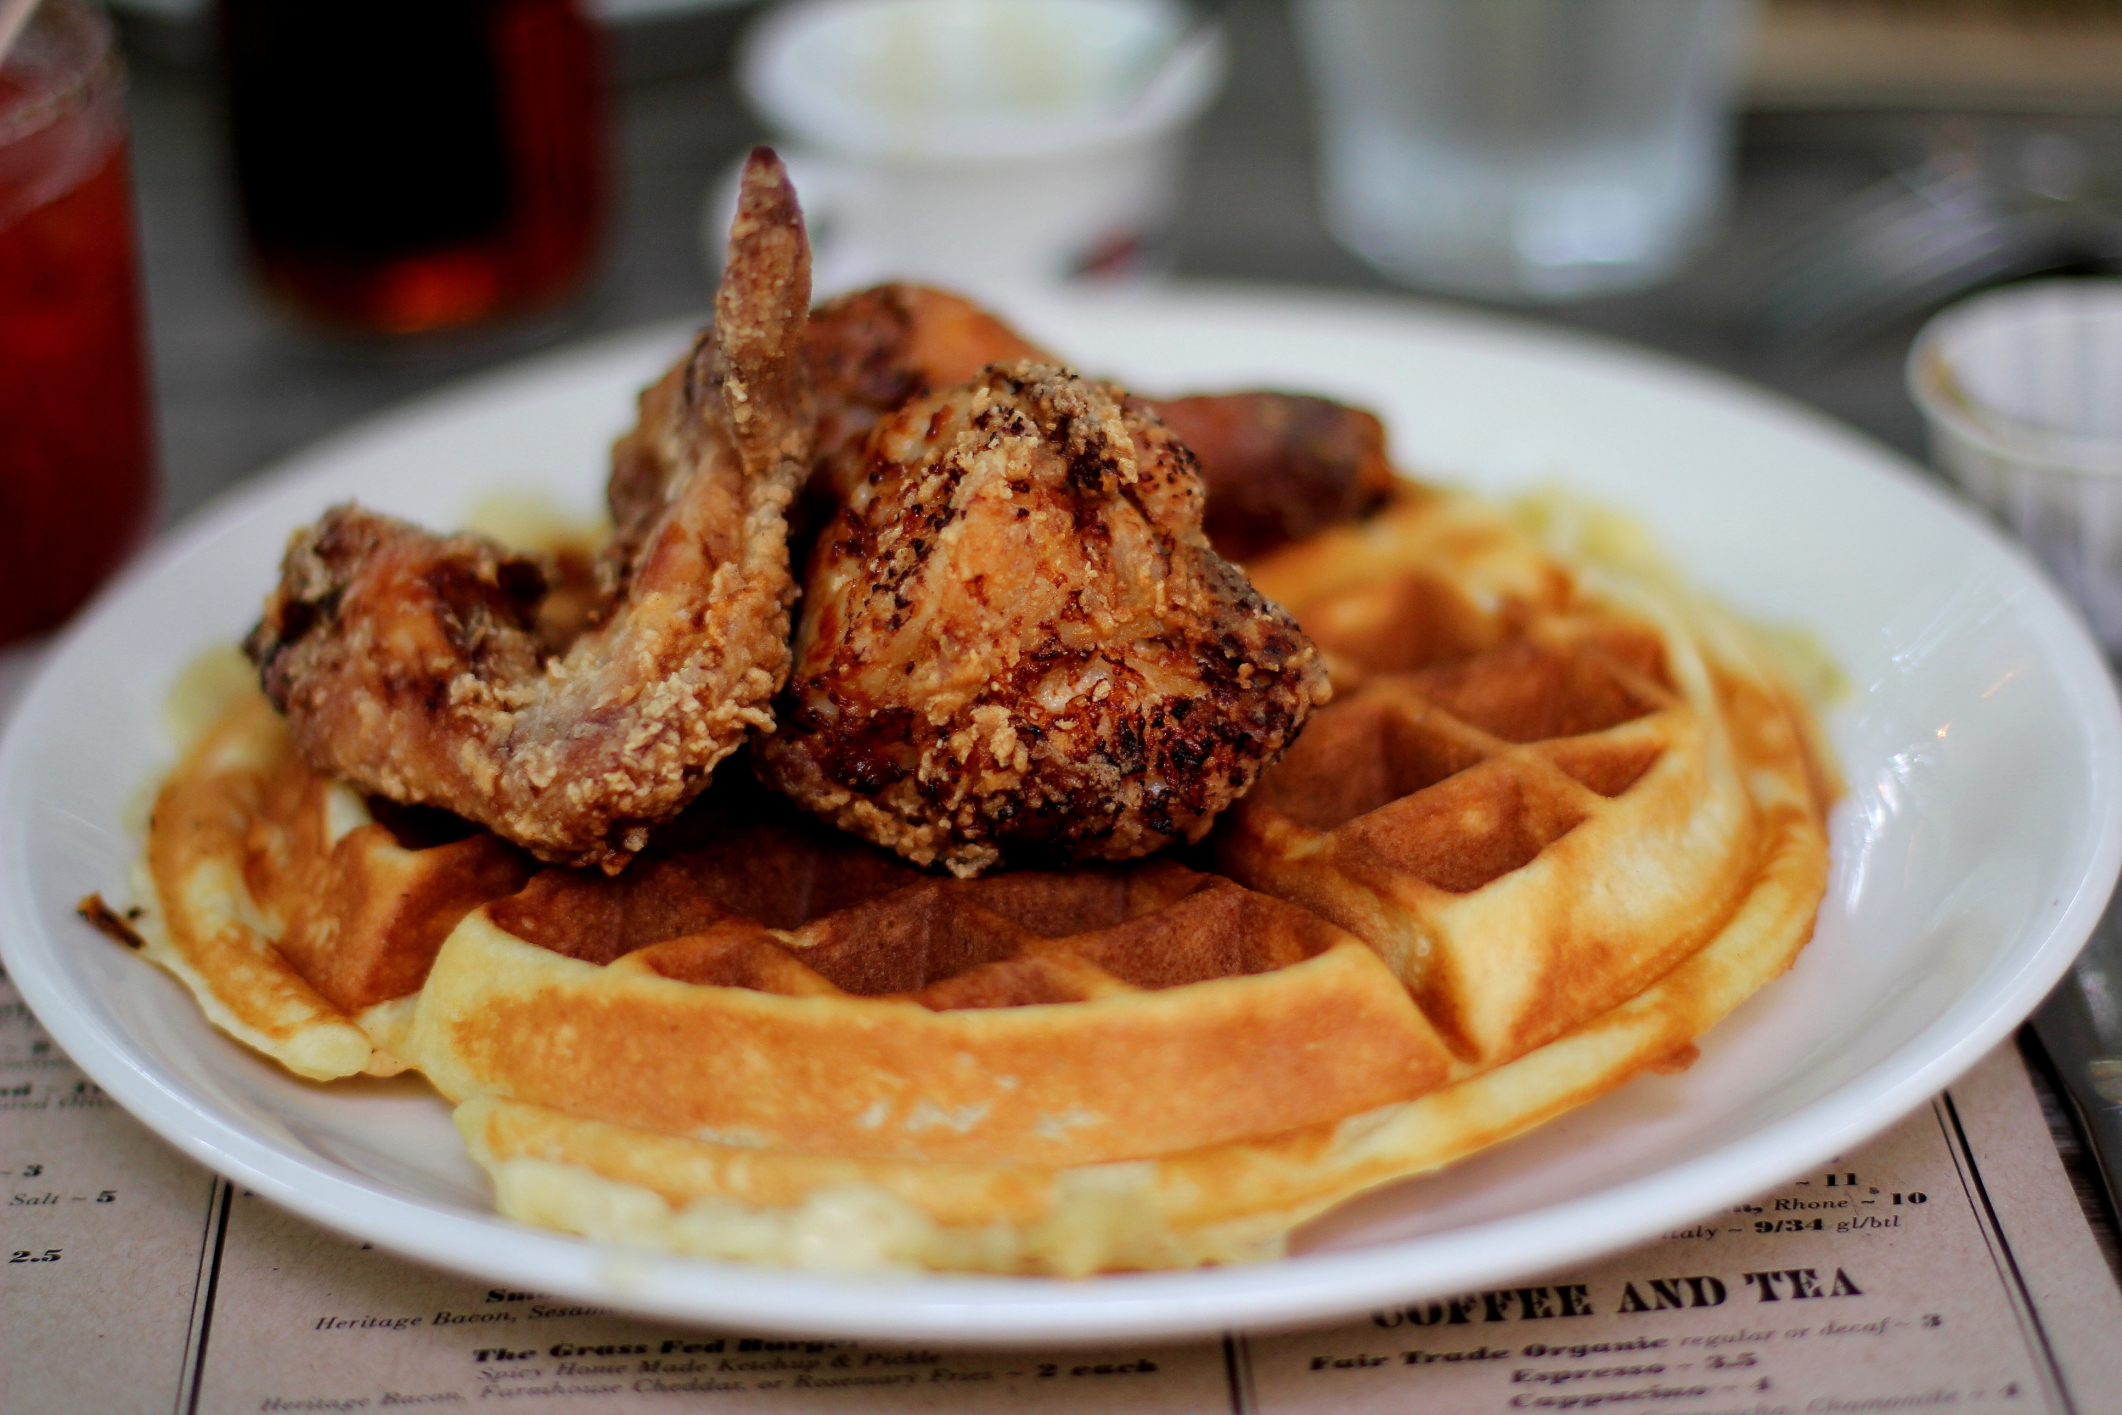 Plate of fired chicken and waffles